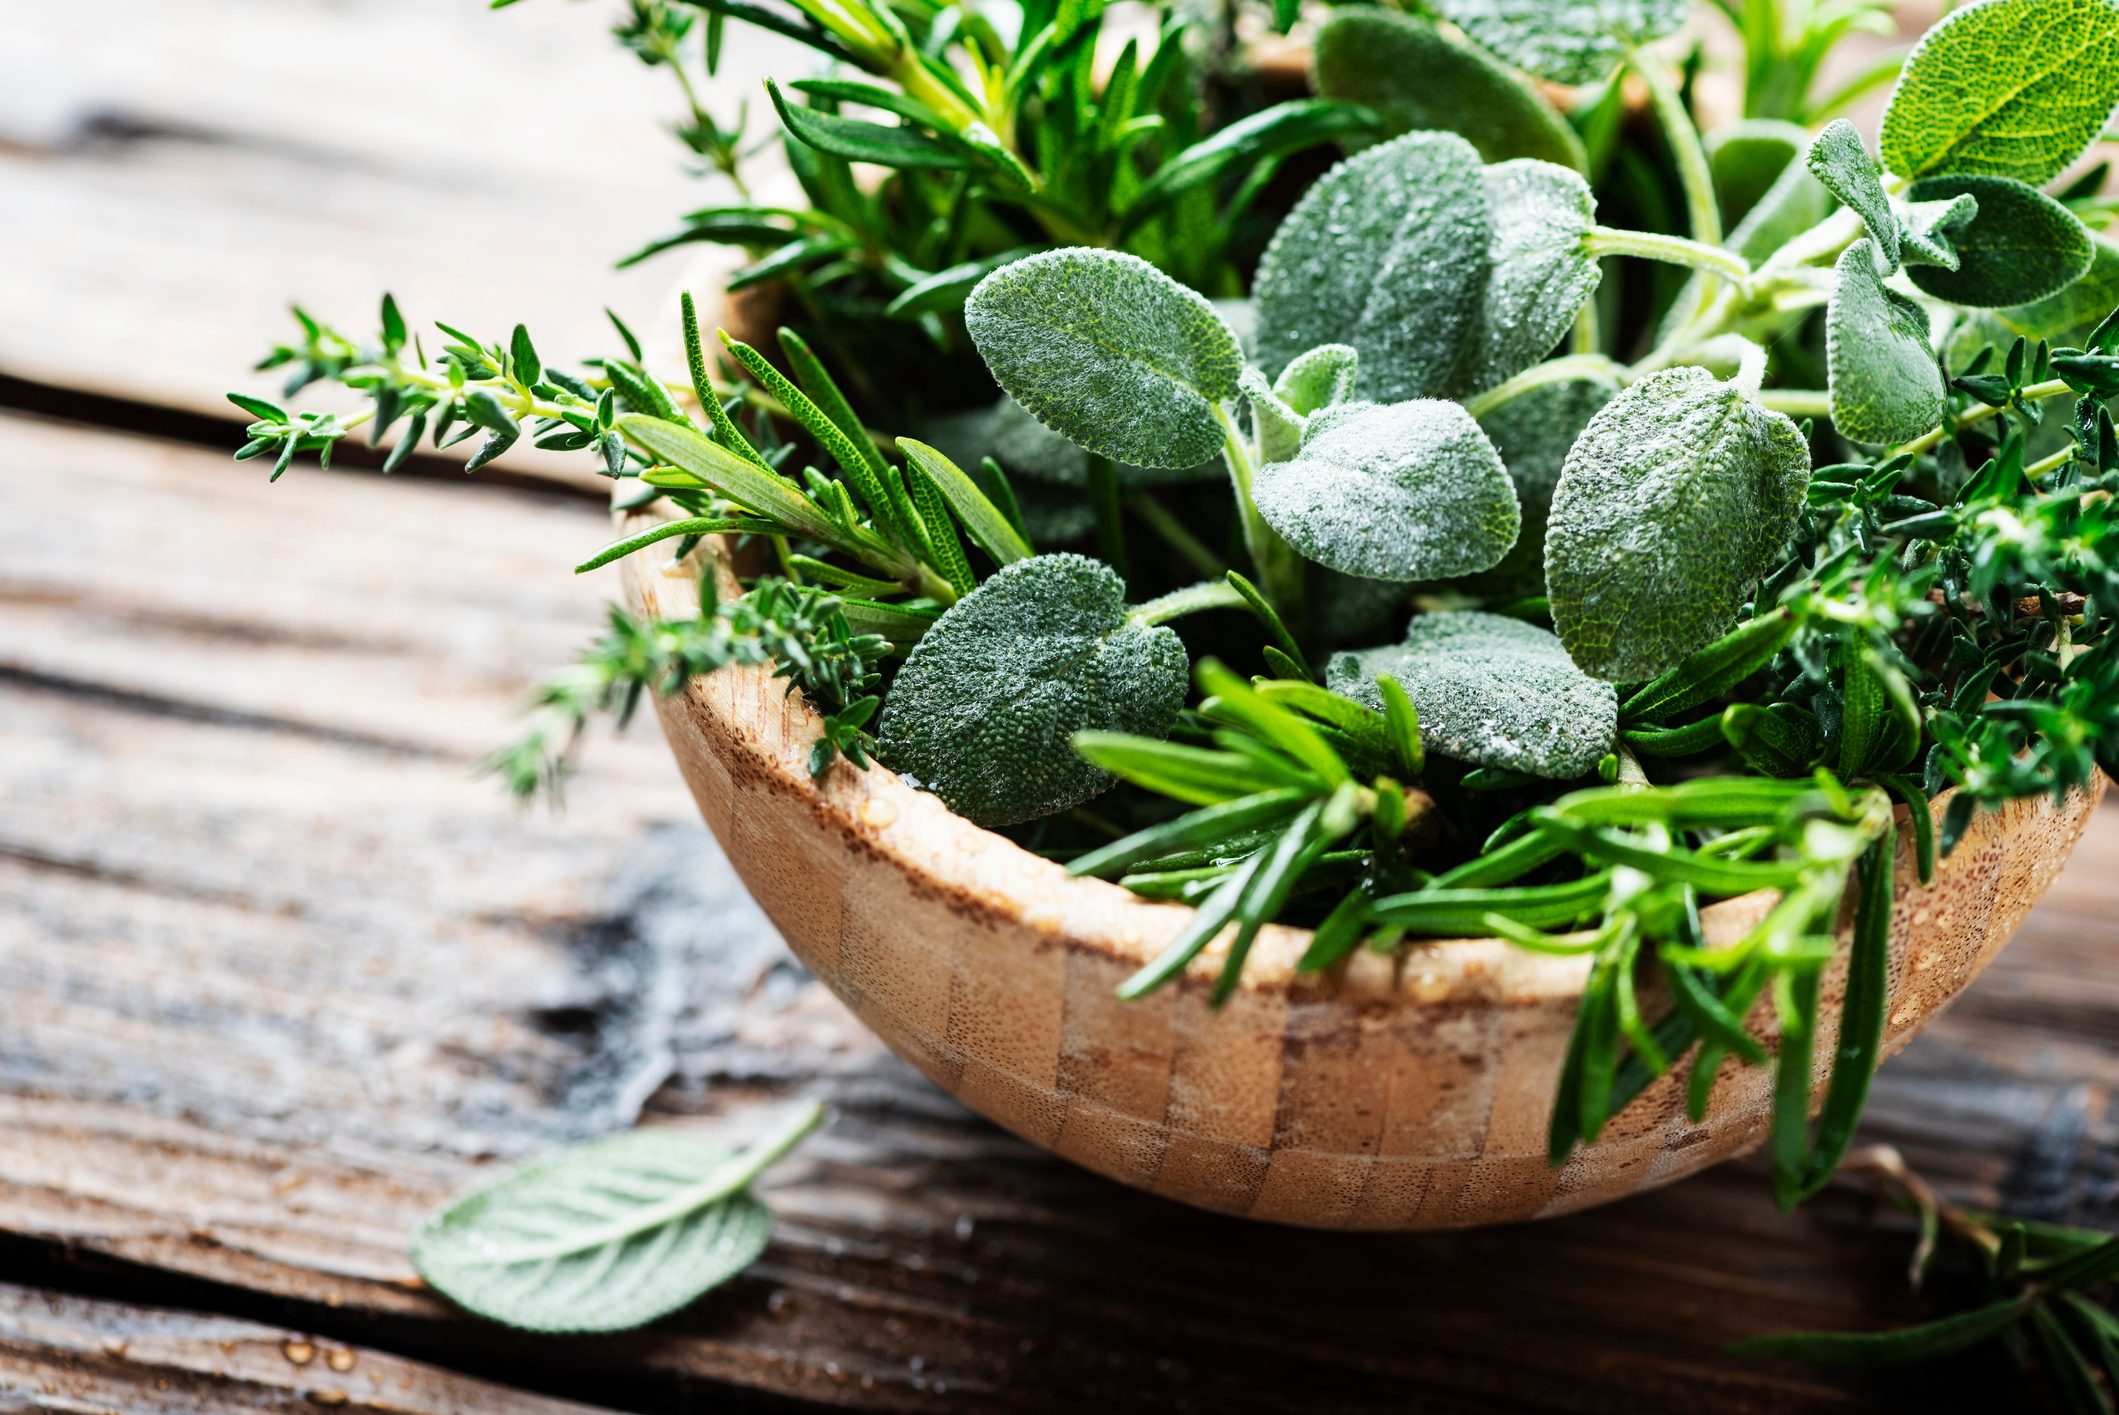 10 Herbs and Spices That May Have Healing Properties | The Healthy